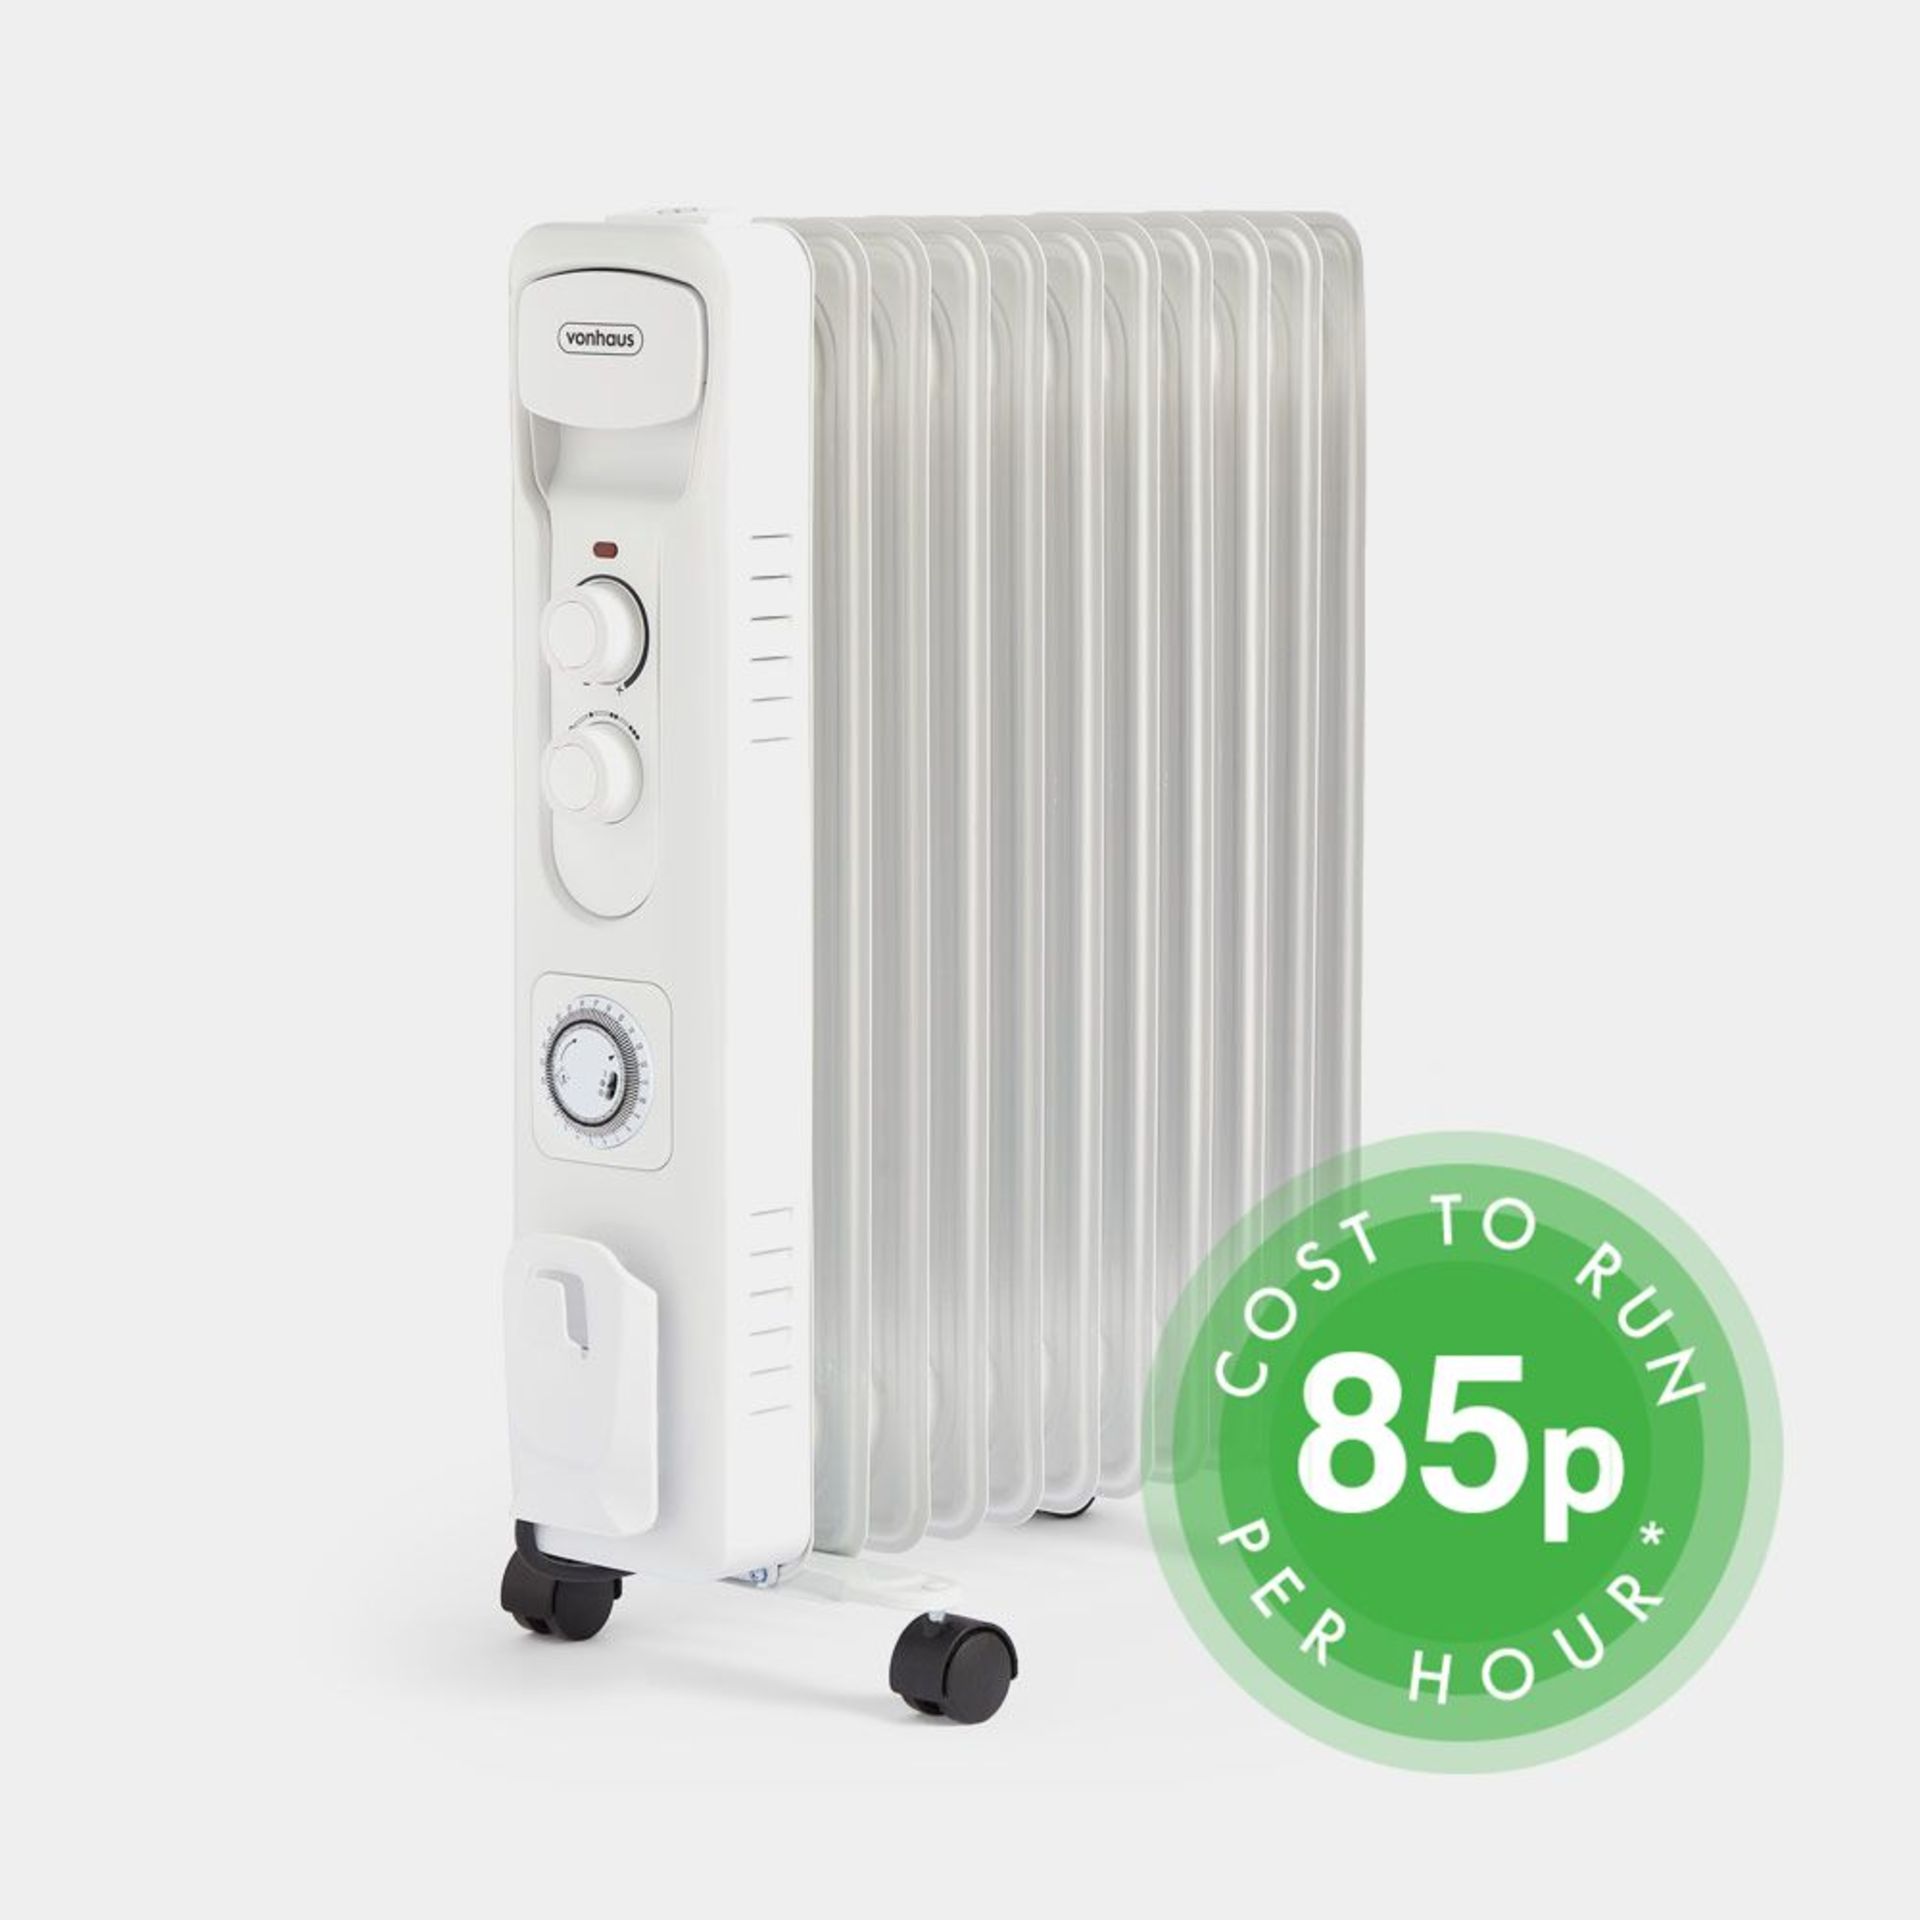 11 Fin 2500W Oil Filled Radiator - White. The radiator is equipped with fantastic safety features